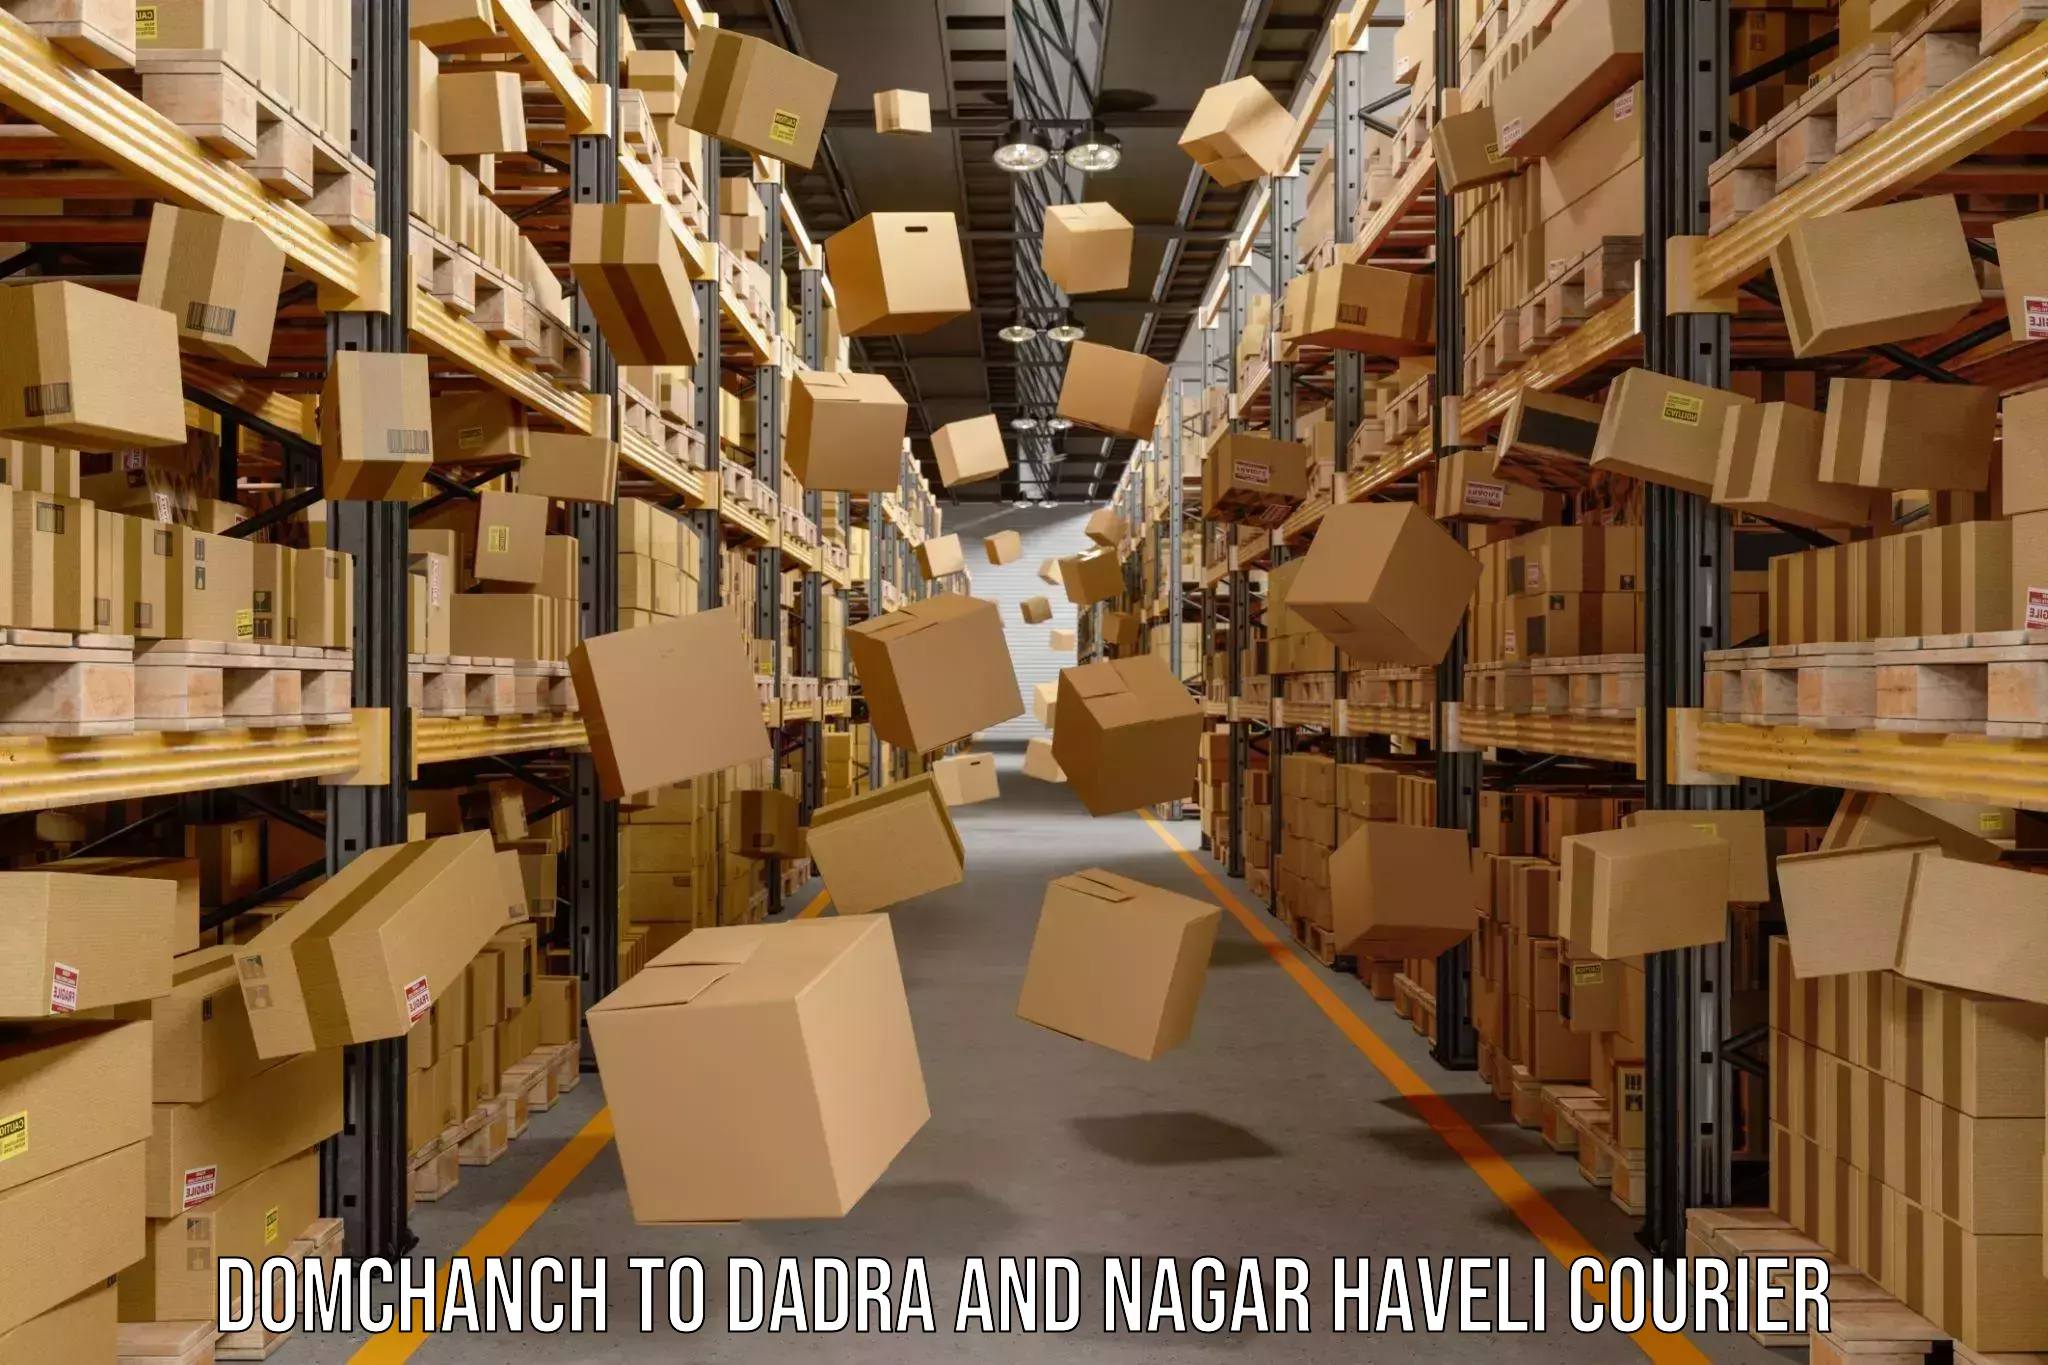 Express delivery capabilities Domchanch to Dadra and Nagar Haveli